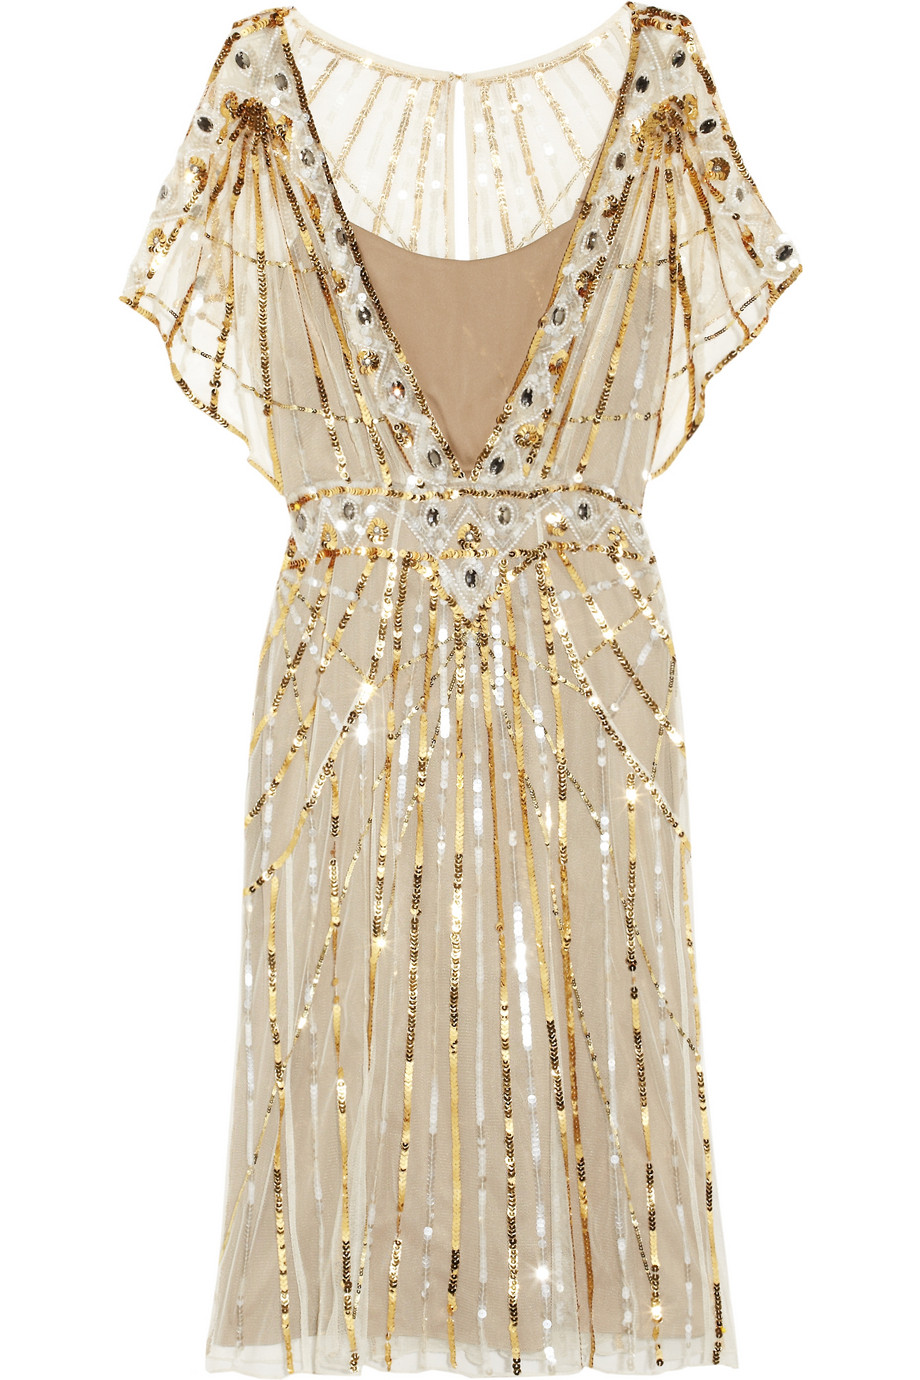 Lyst - Temperley London Web Sequined Tulle Dress in White